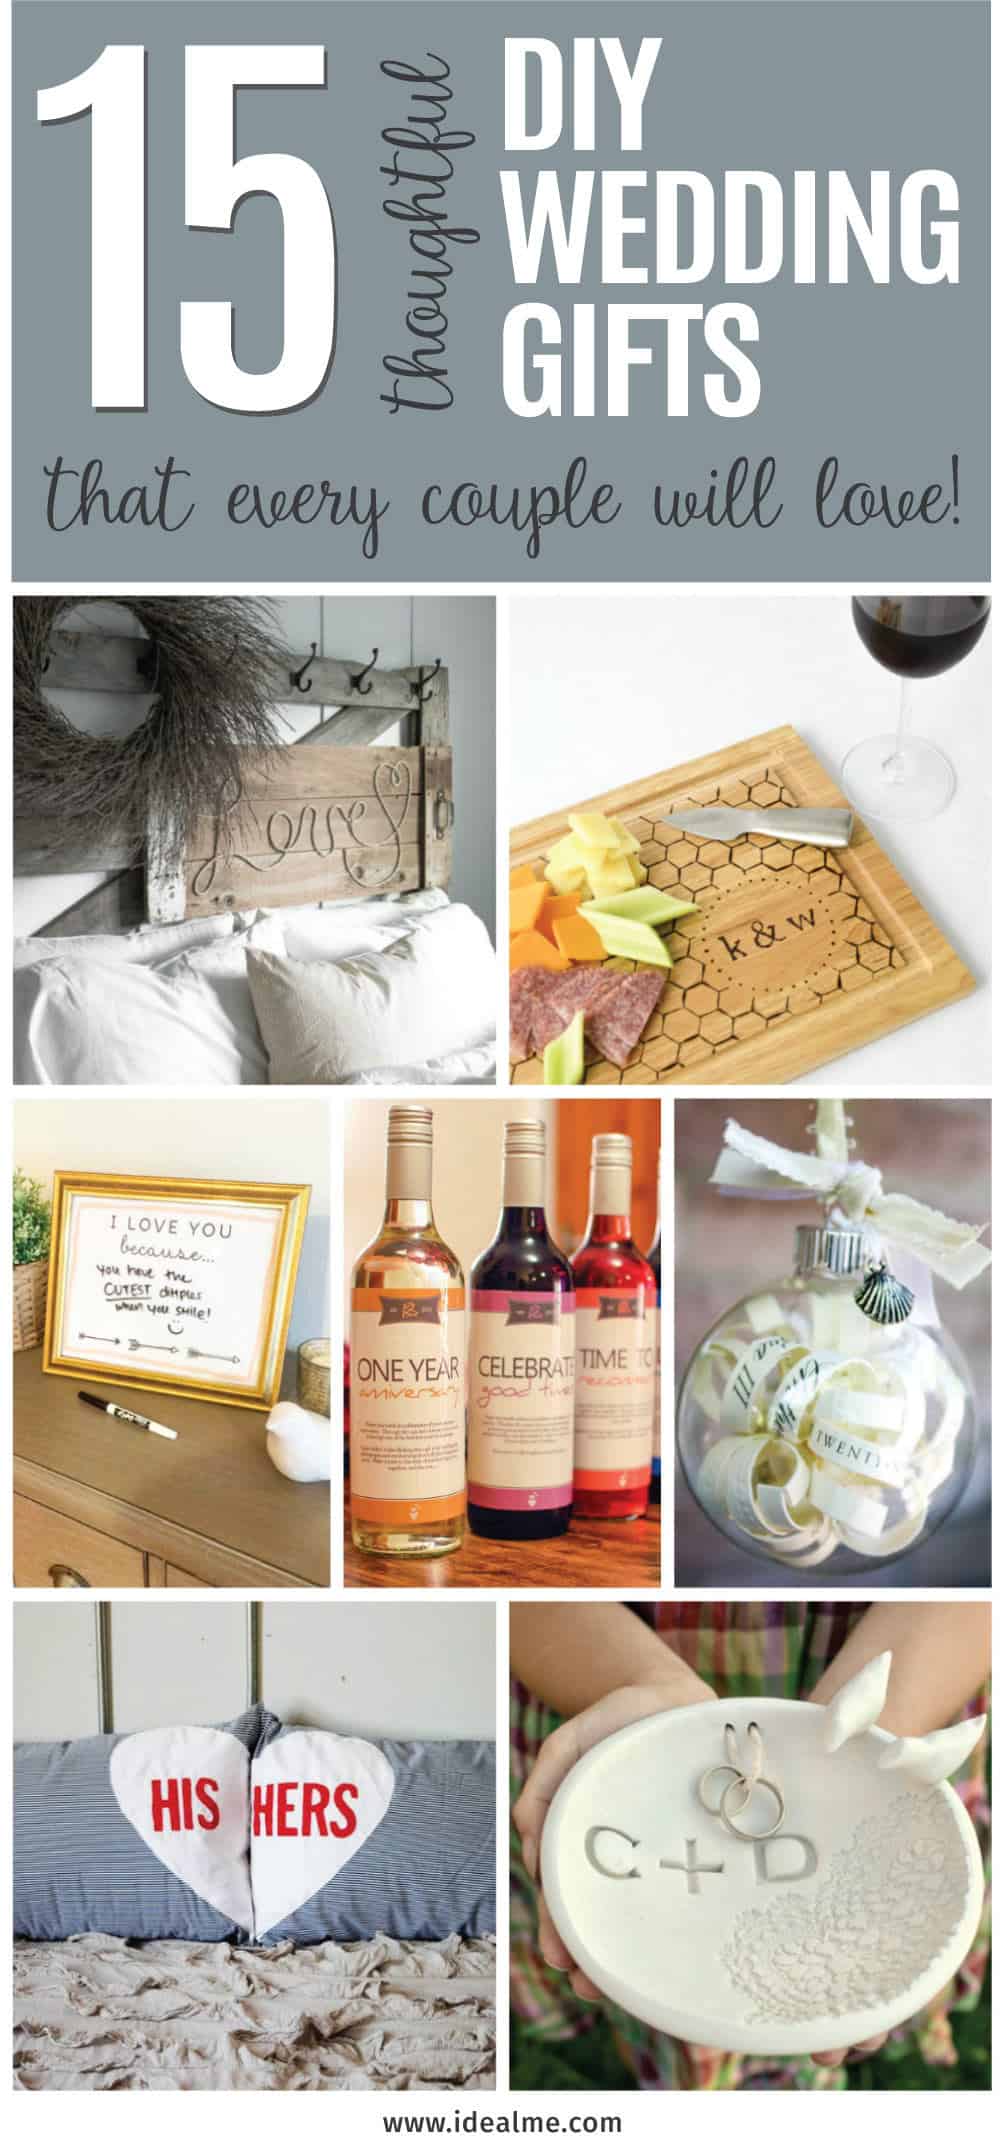 Are you struggling to figure out what to get your favorite newlyweds? Don't stress! We've got the perfect thoughtful DIY wedding gifts that every couple will love. 